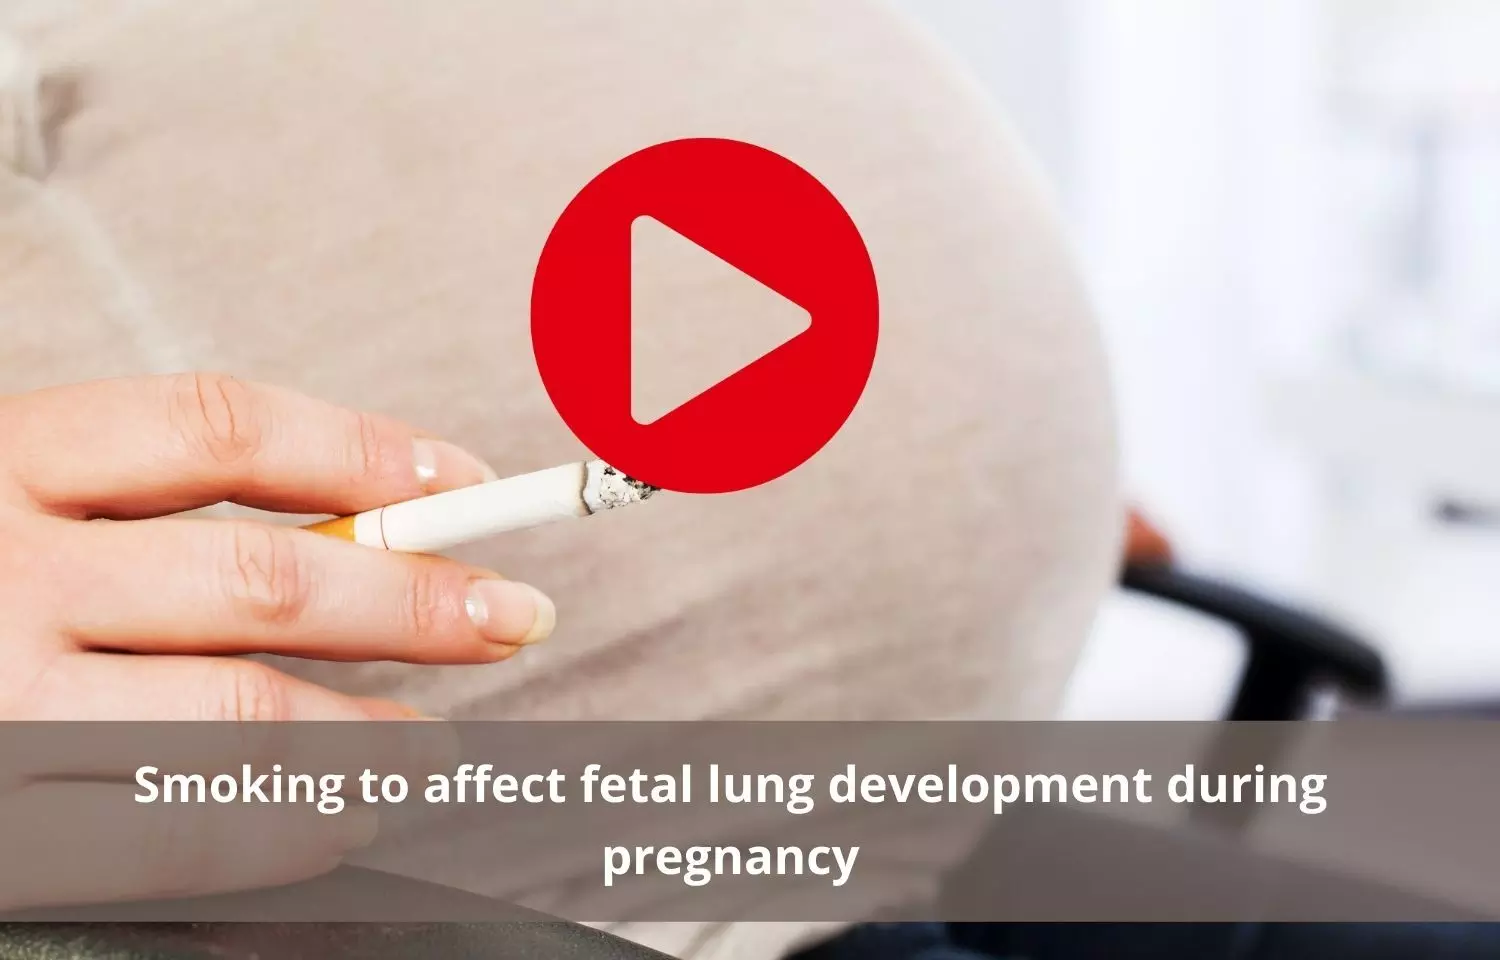 Smoking in pregnancy affects fetal lung development